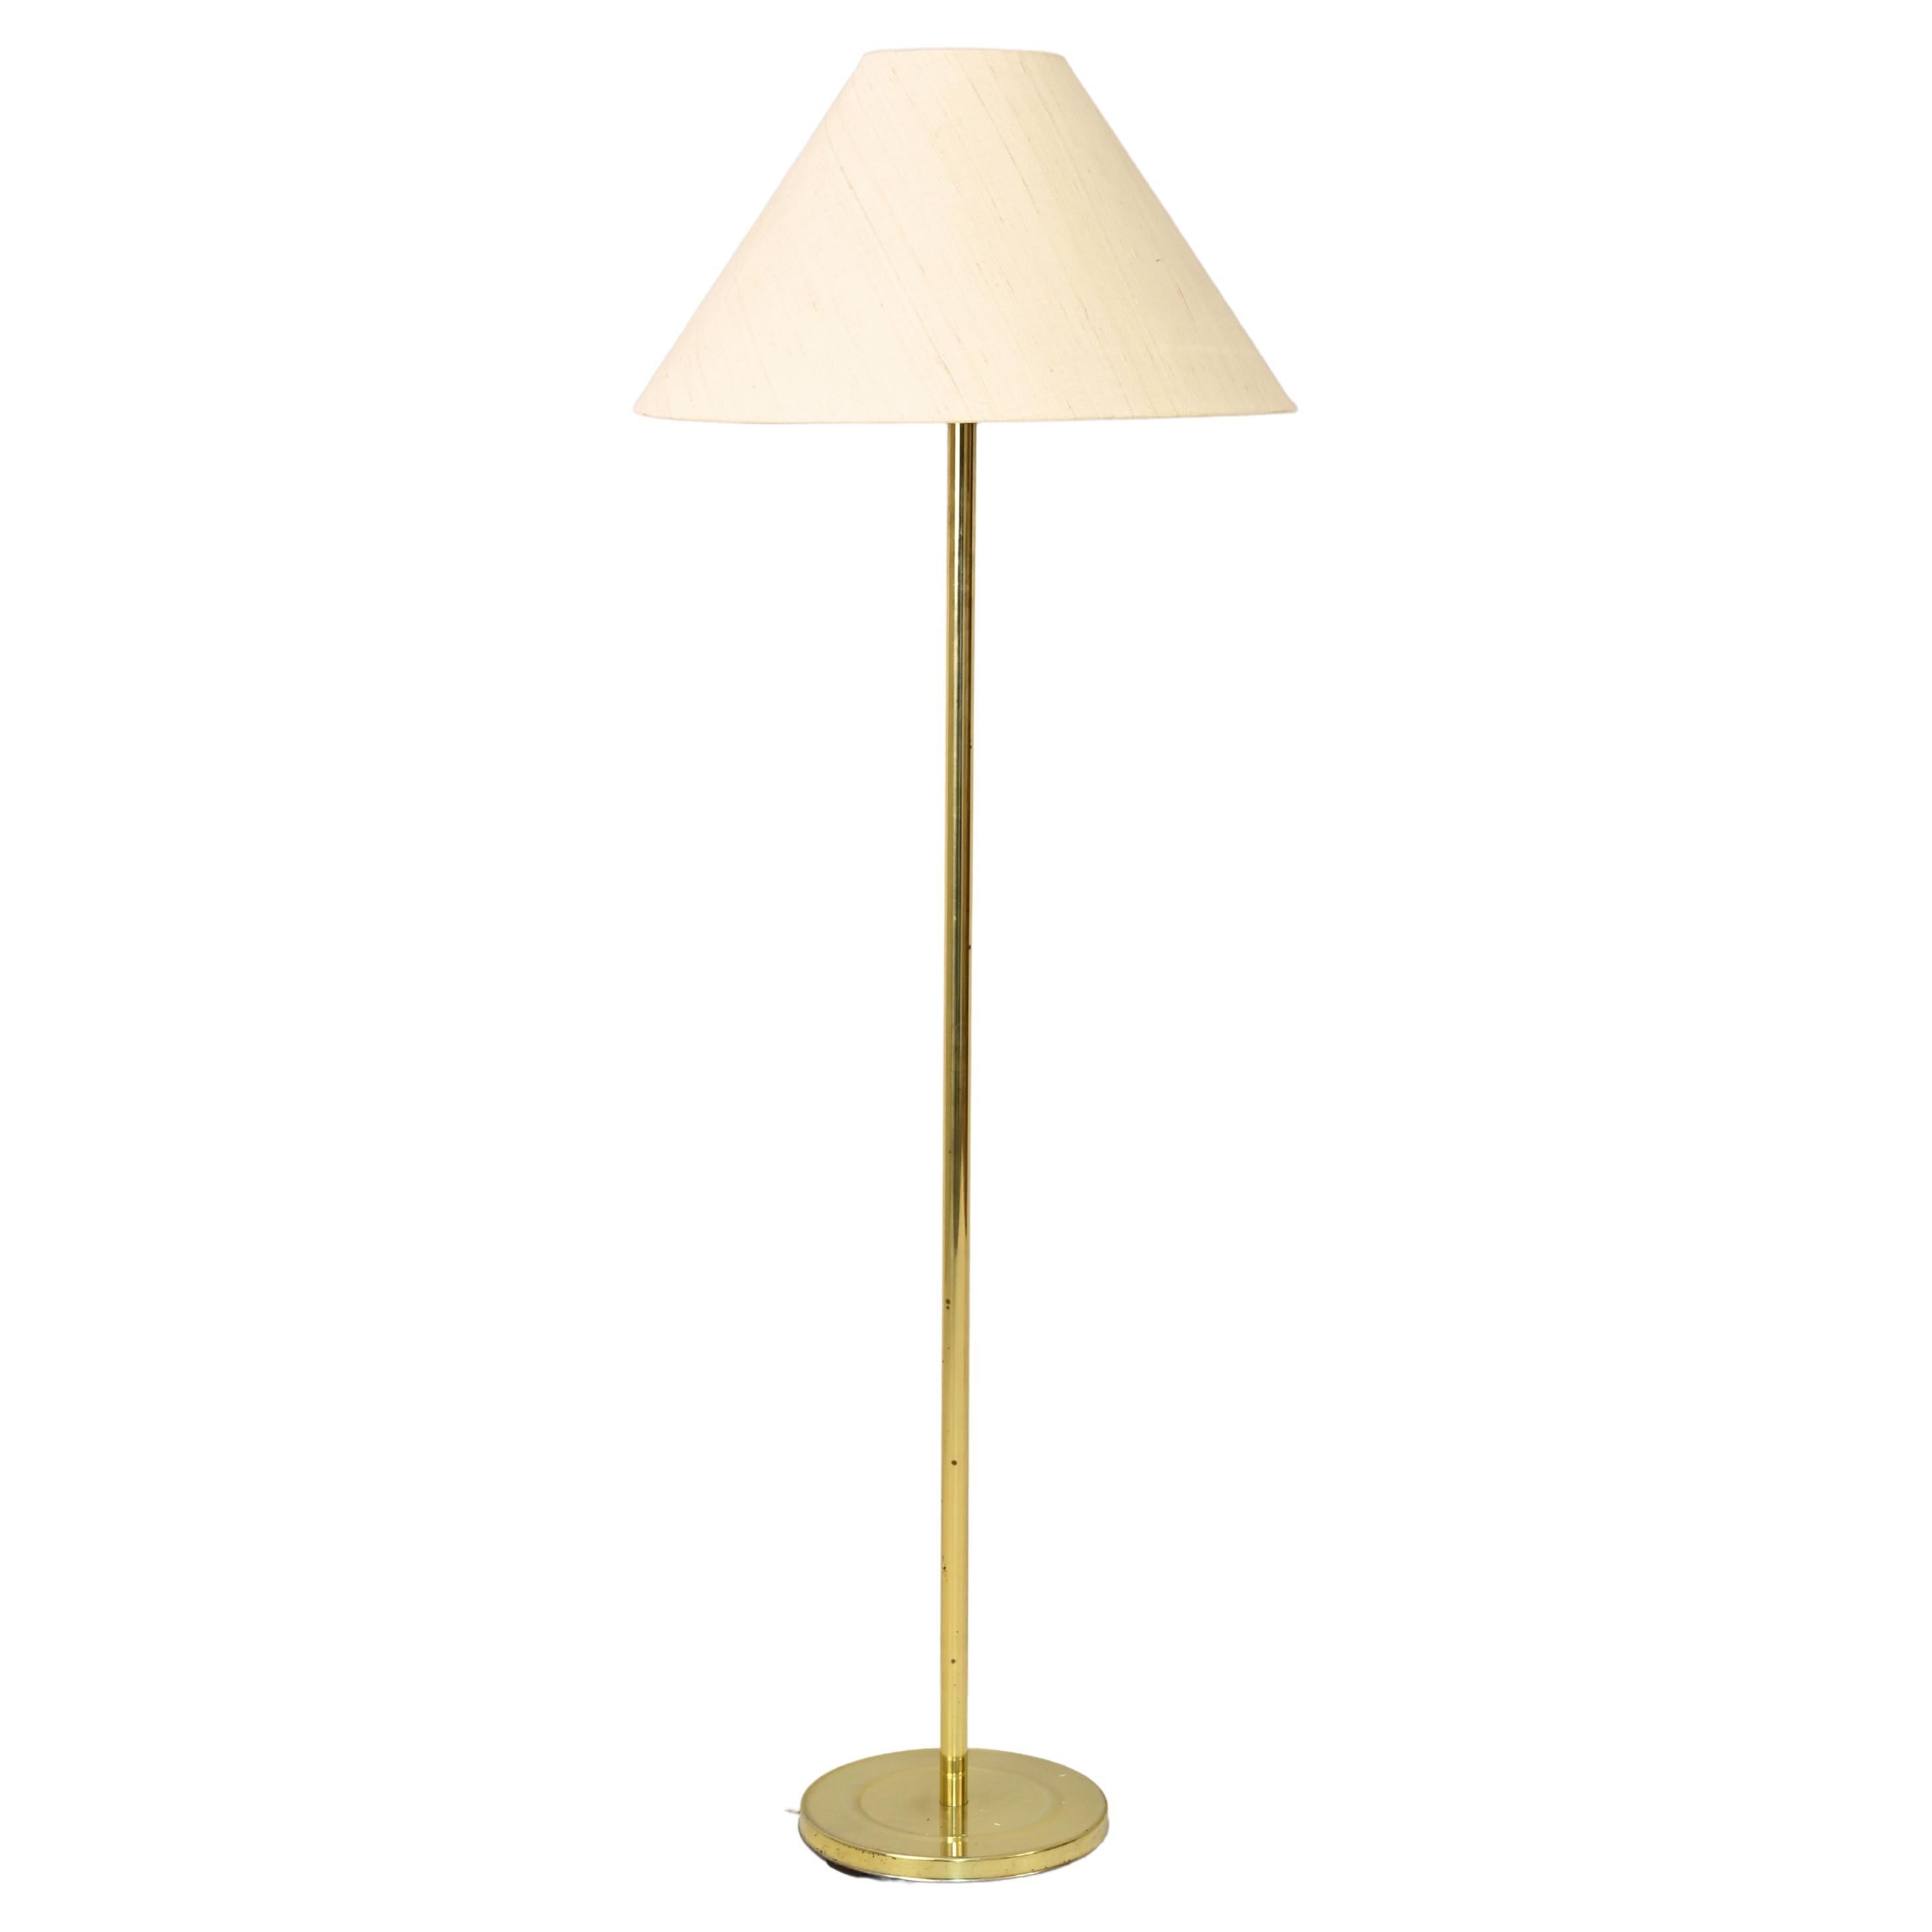 Vintage Floor Lamp with Gold Base